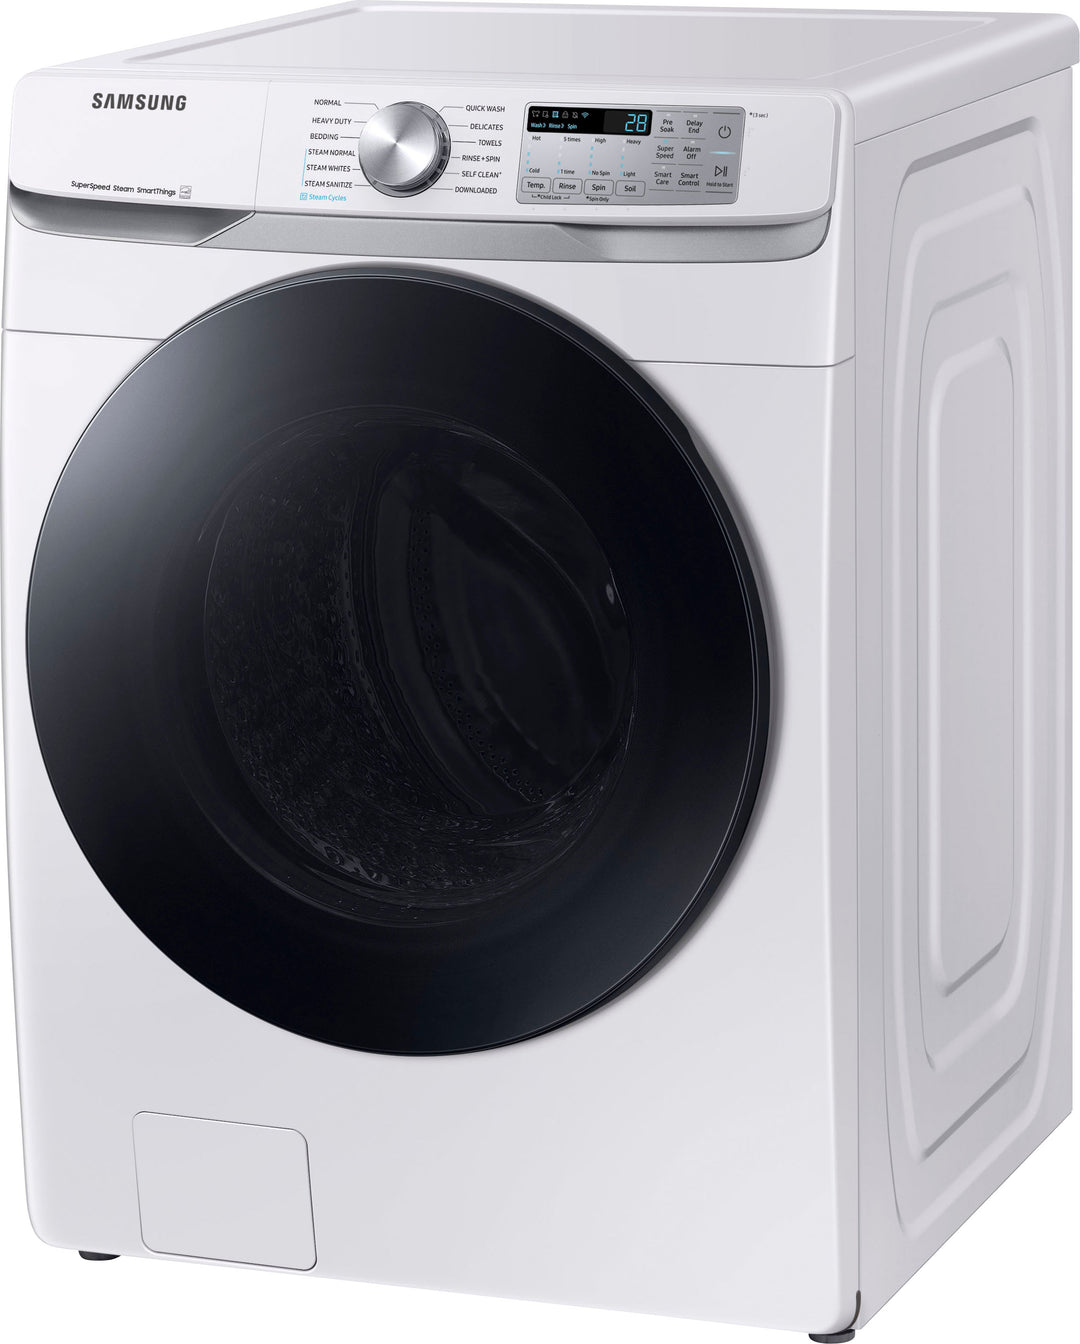 Samsung - 4.5 cu. ft. Large Capacity Smart Front Load Washer with Super Speed Wash - White_12